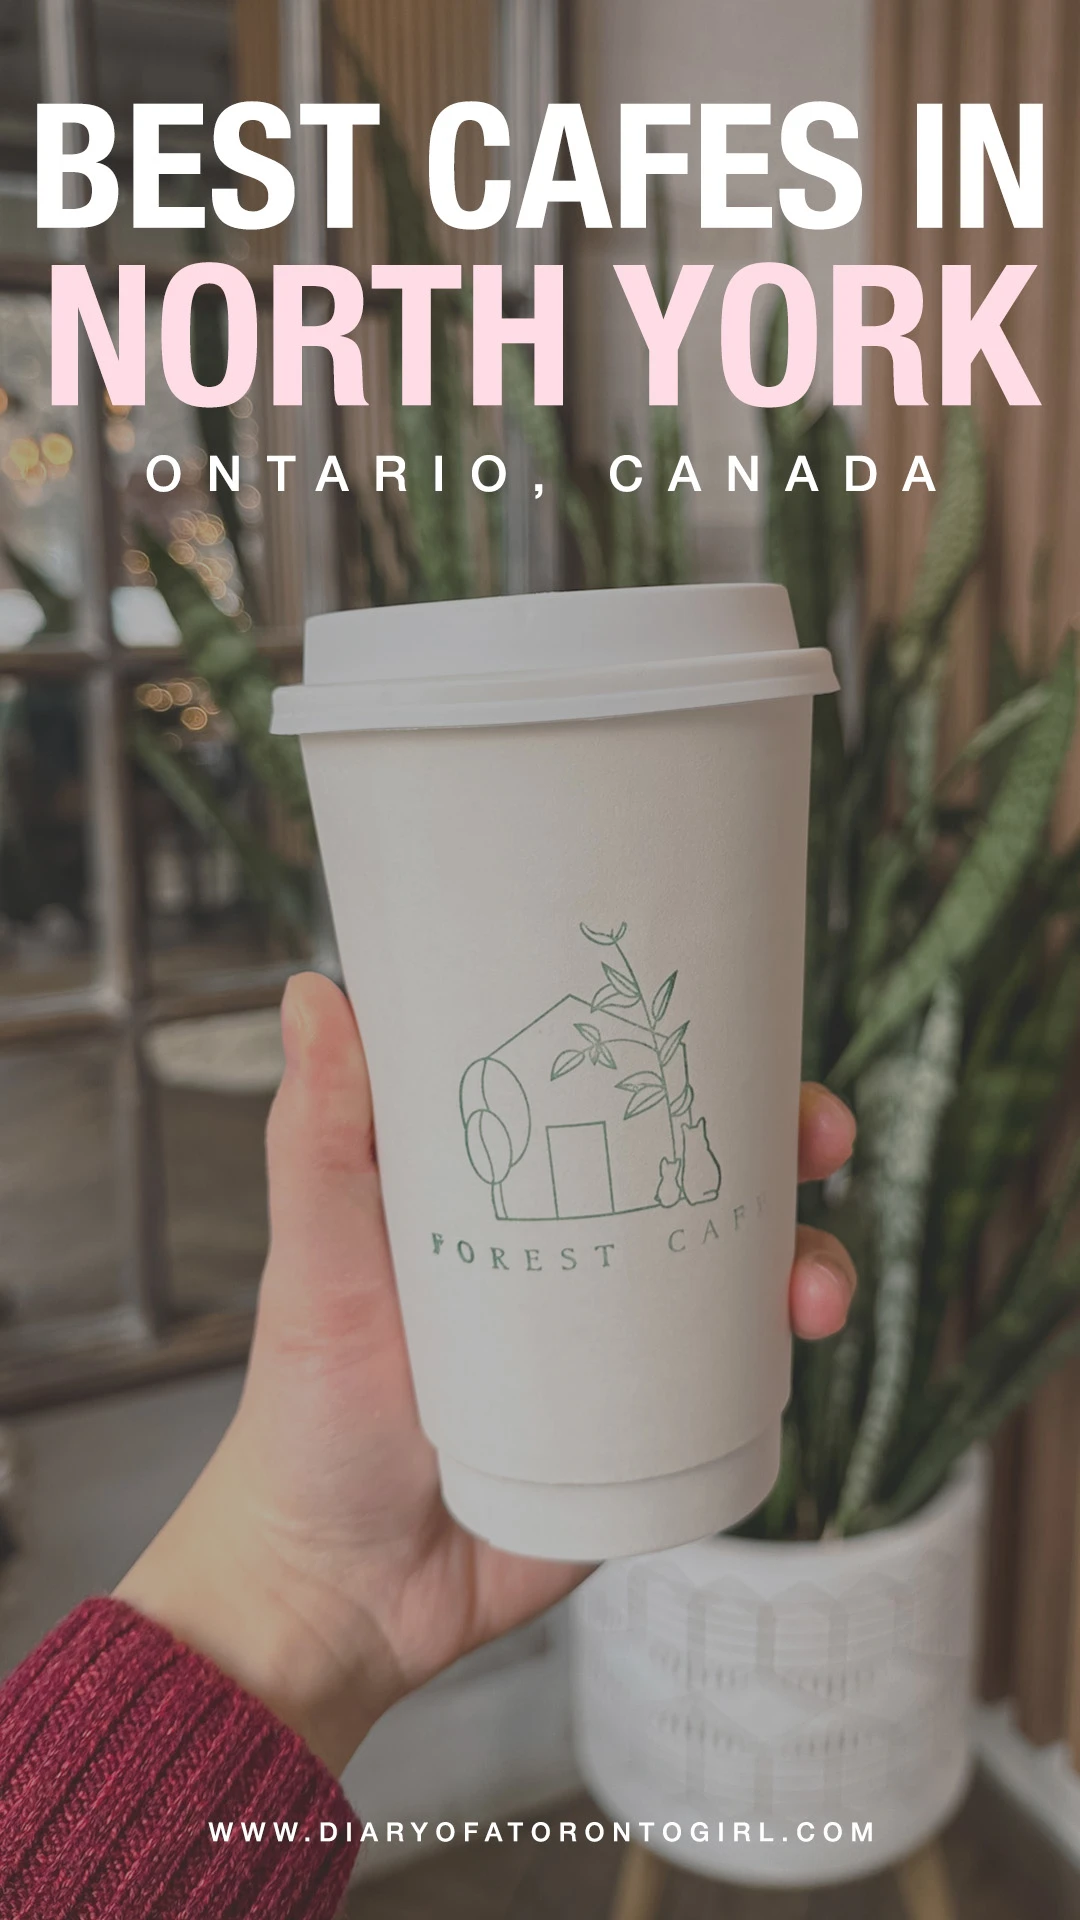 Best cafes in North York, Ontario